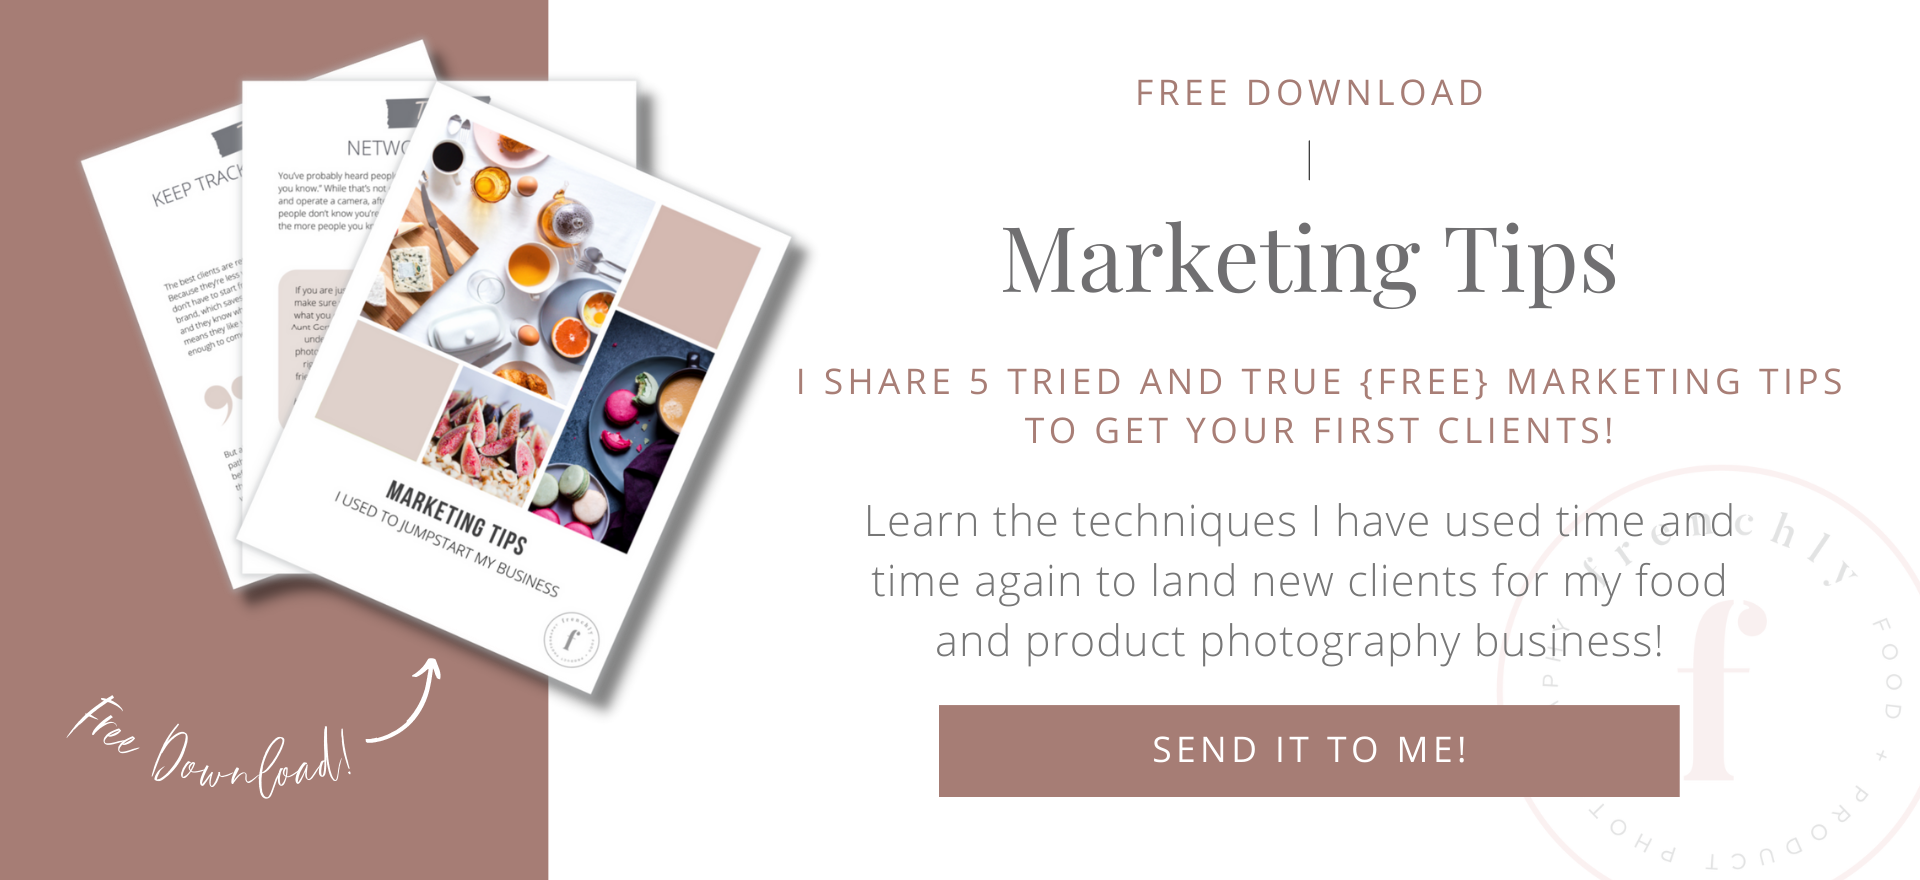 Marketing-Tips-Frenchly-Photography-Fanette-Rickert